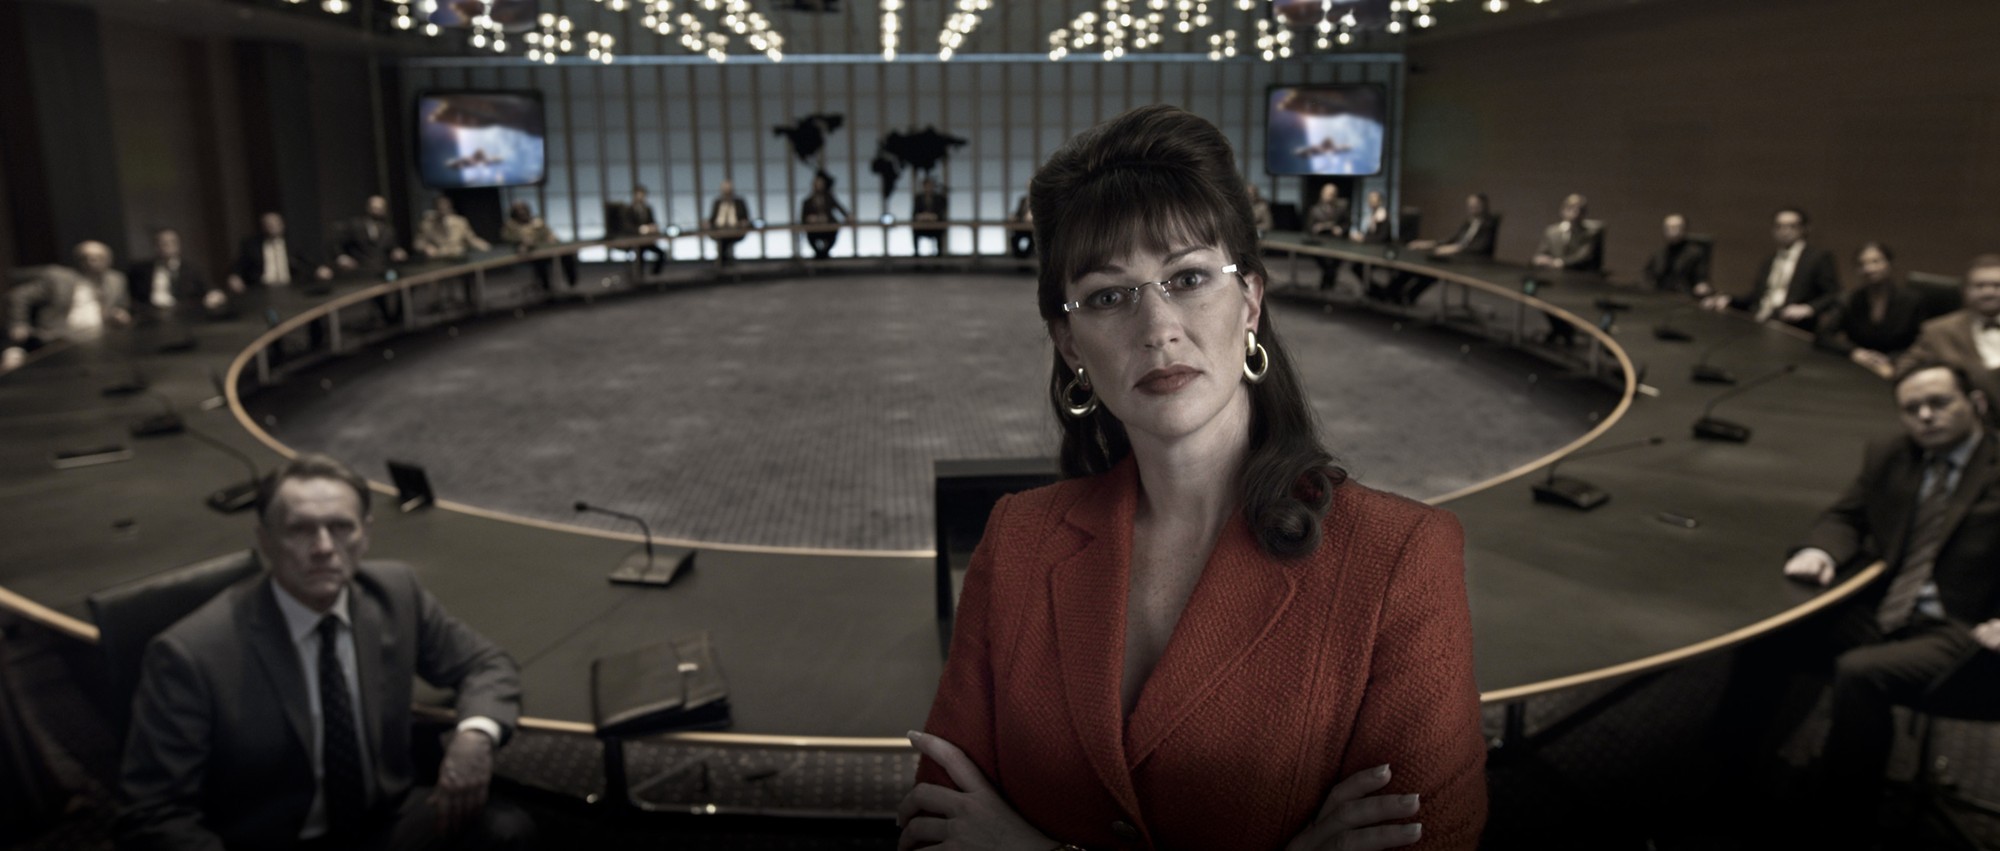 Michael Cullen stars as Secretary of Defence and Stephanie Paul stars as President of the United States in Entertainment One's Iron Sky (2012)